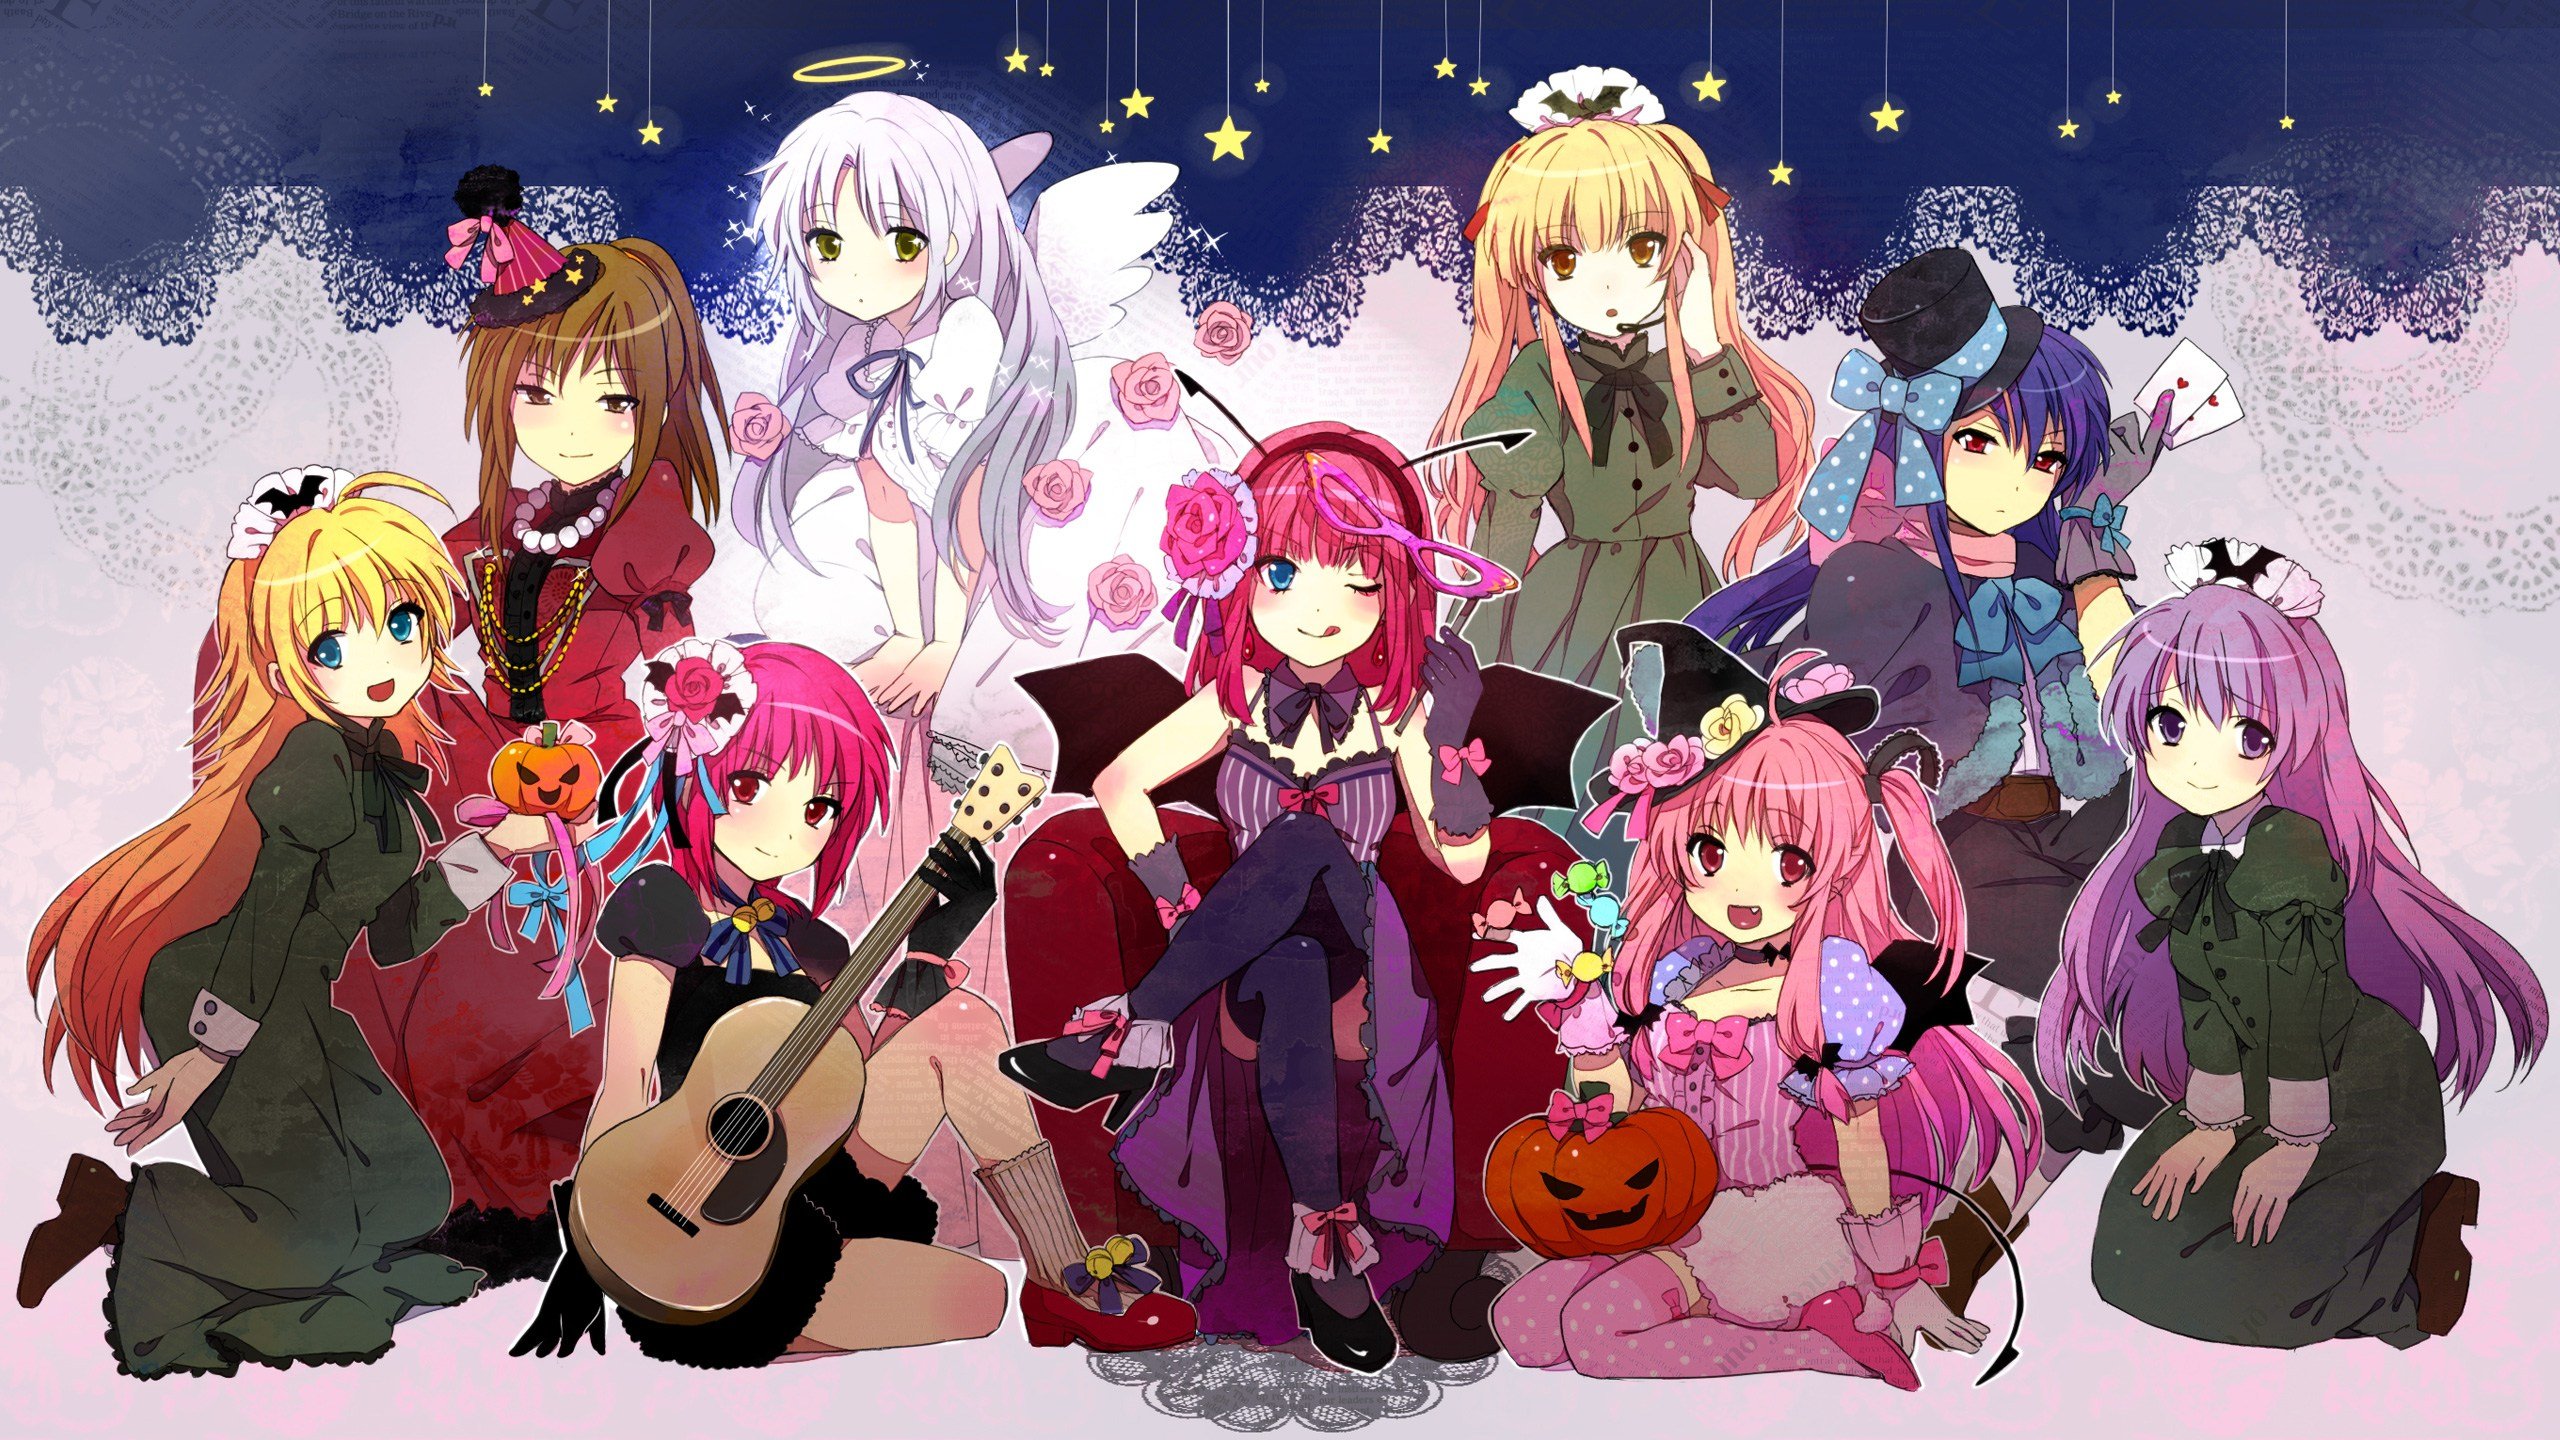 Angel Beats Anime Series Character Group Girls Flower Pink Rose Guitar Witch Kawaii Cute Wallpapers Hd Desktop And Mobile Backgrounds